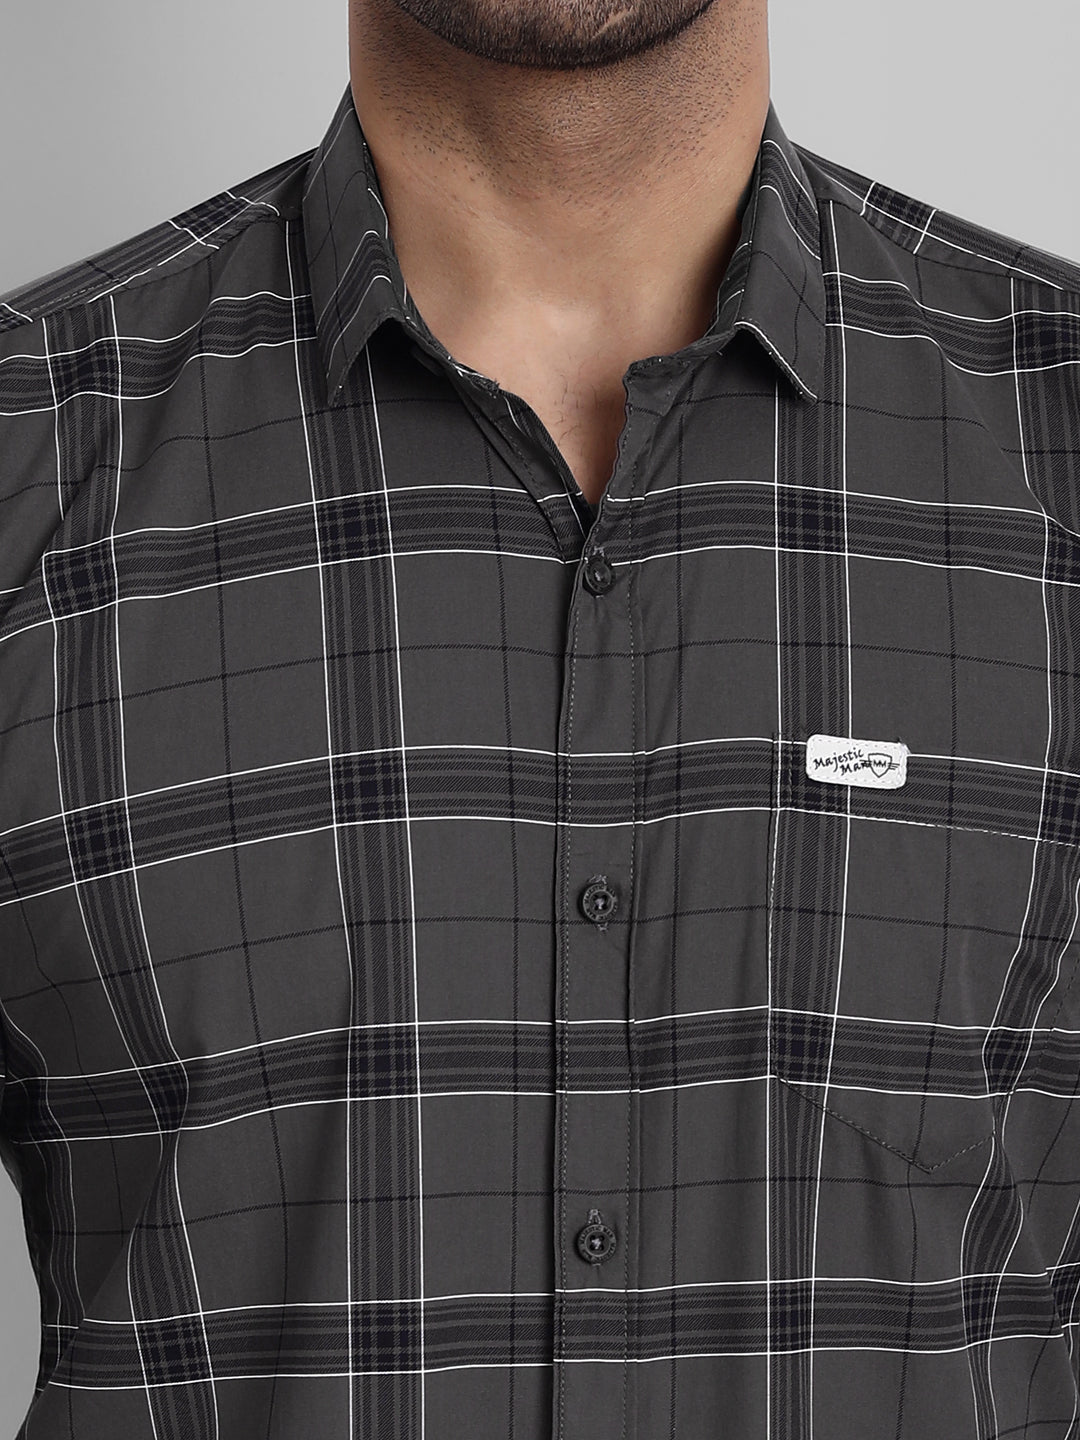 Classic Checkmate Pure Cotton Checkered Shirt - Grey